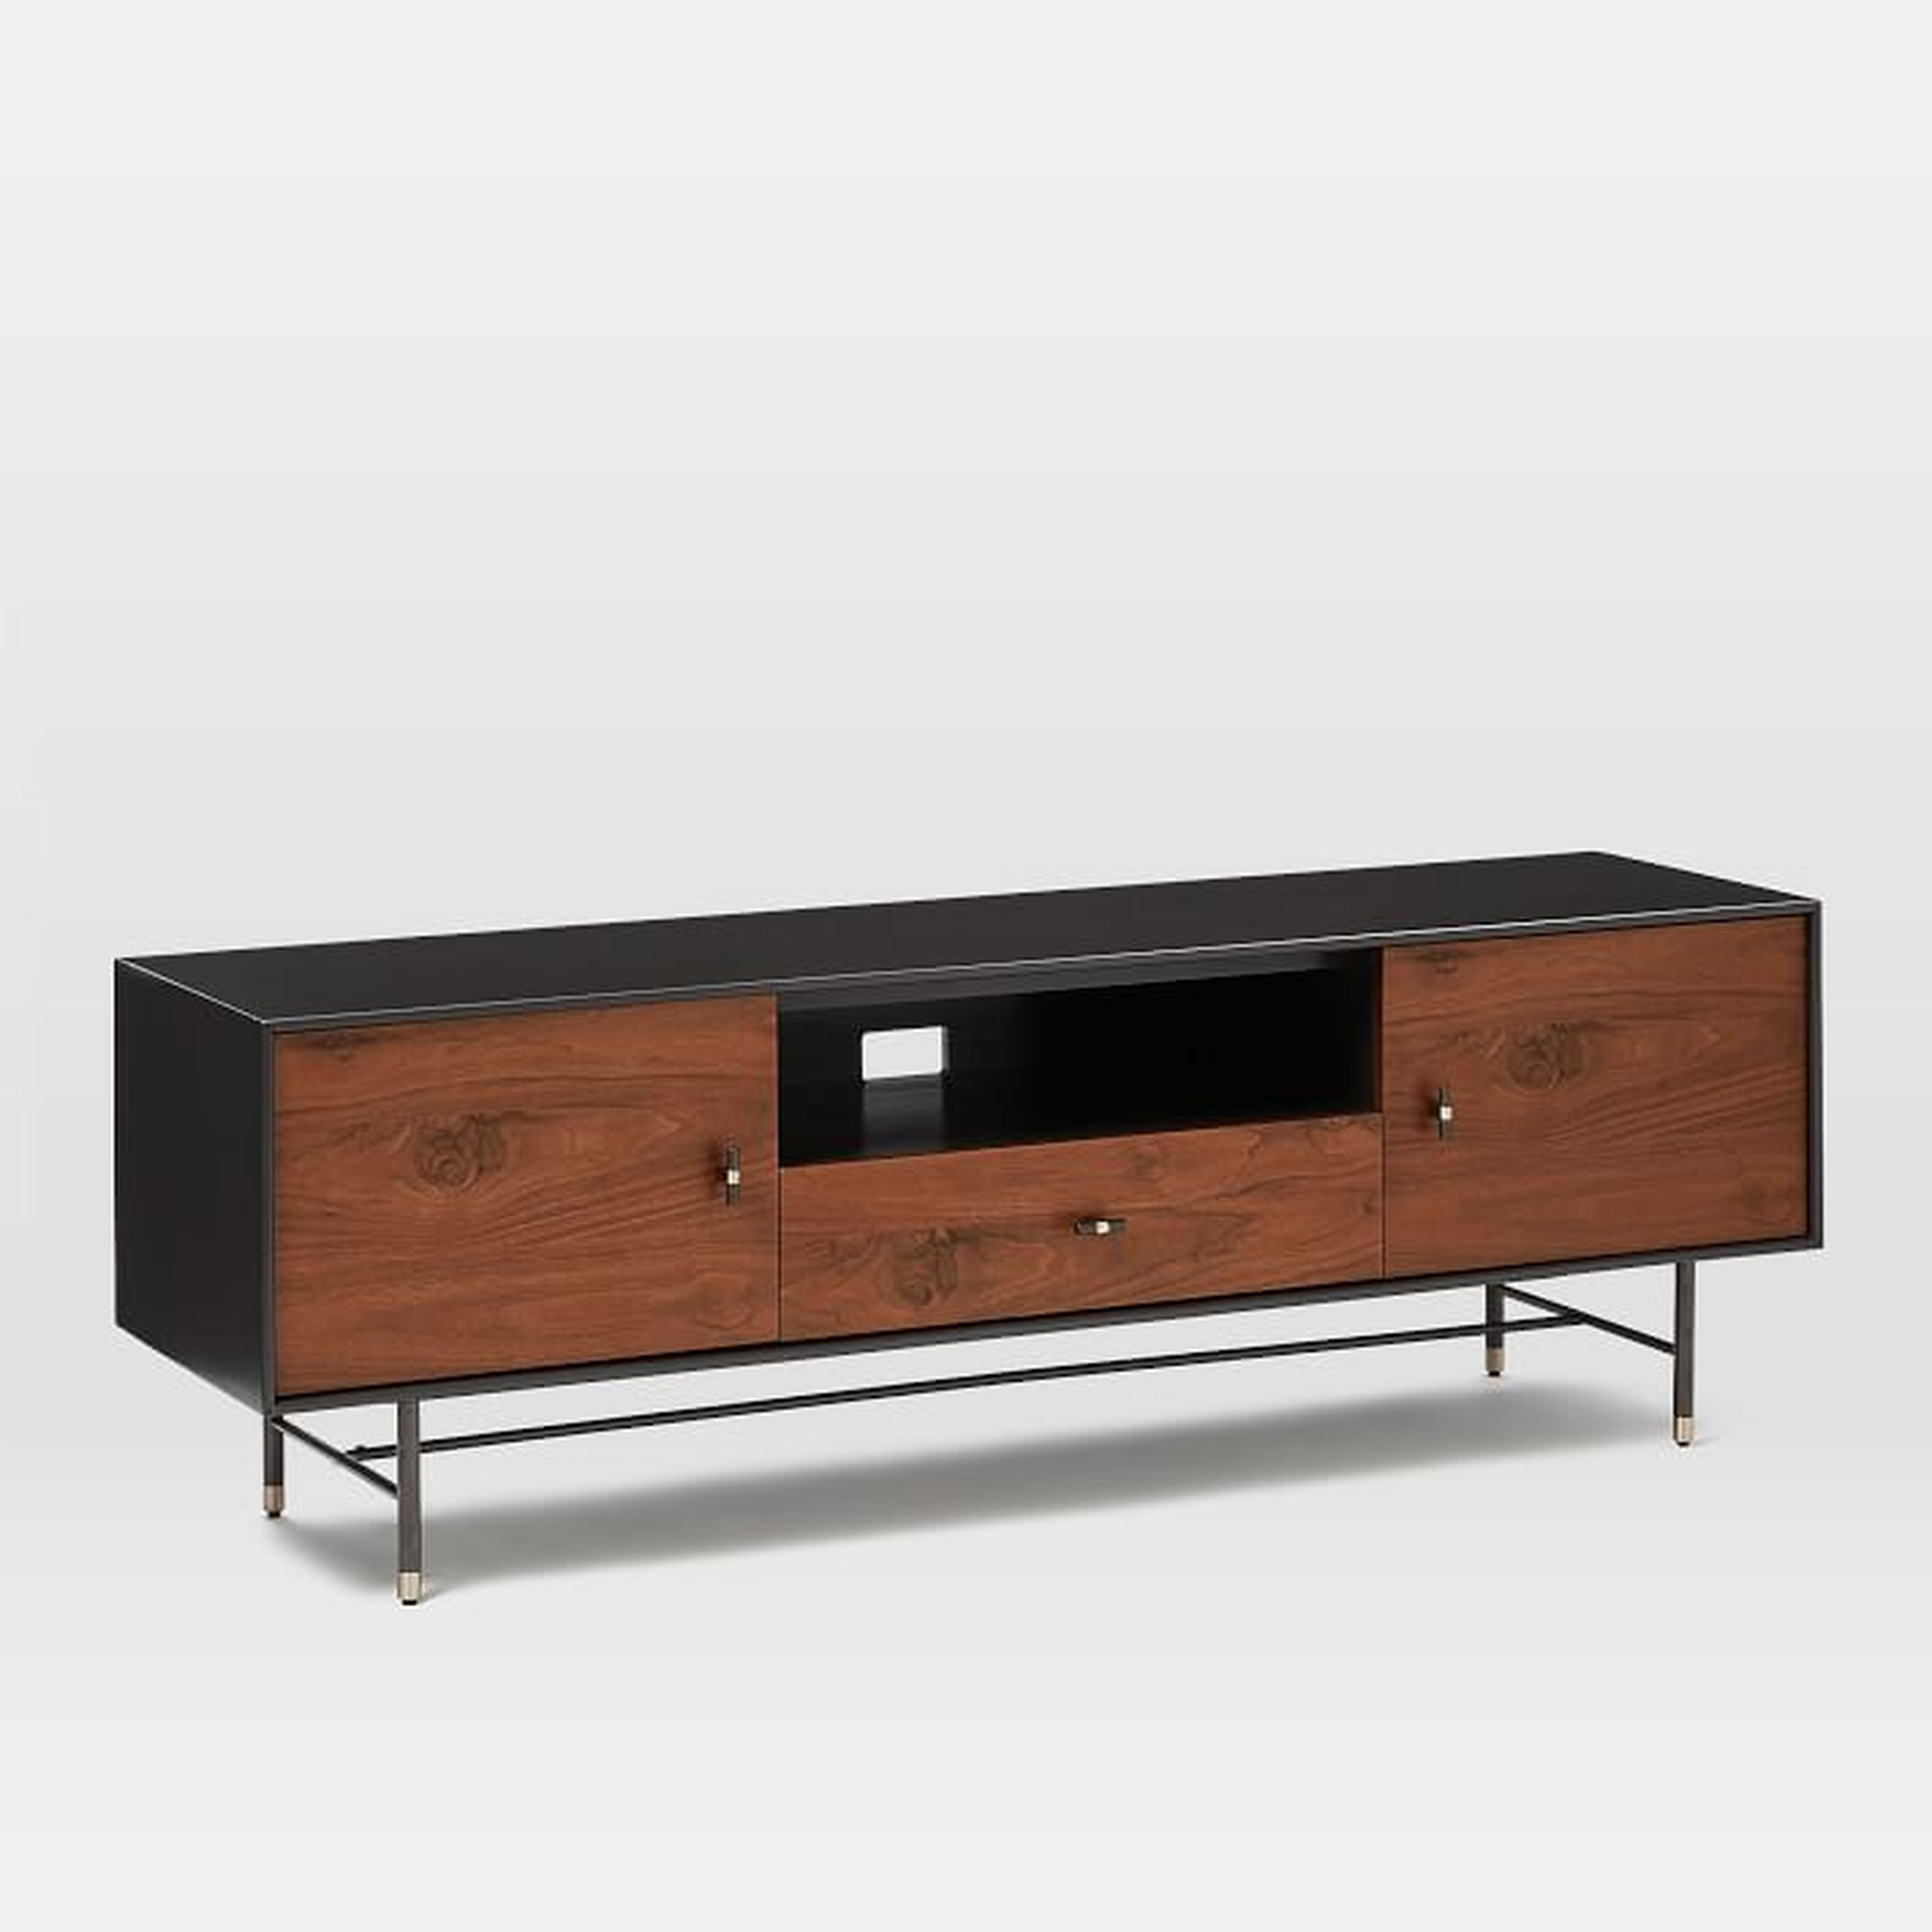 Modernist Wood & Lacquer Media Console (68") - Anthracite - West Elm